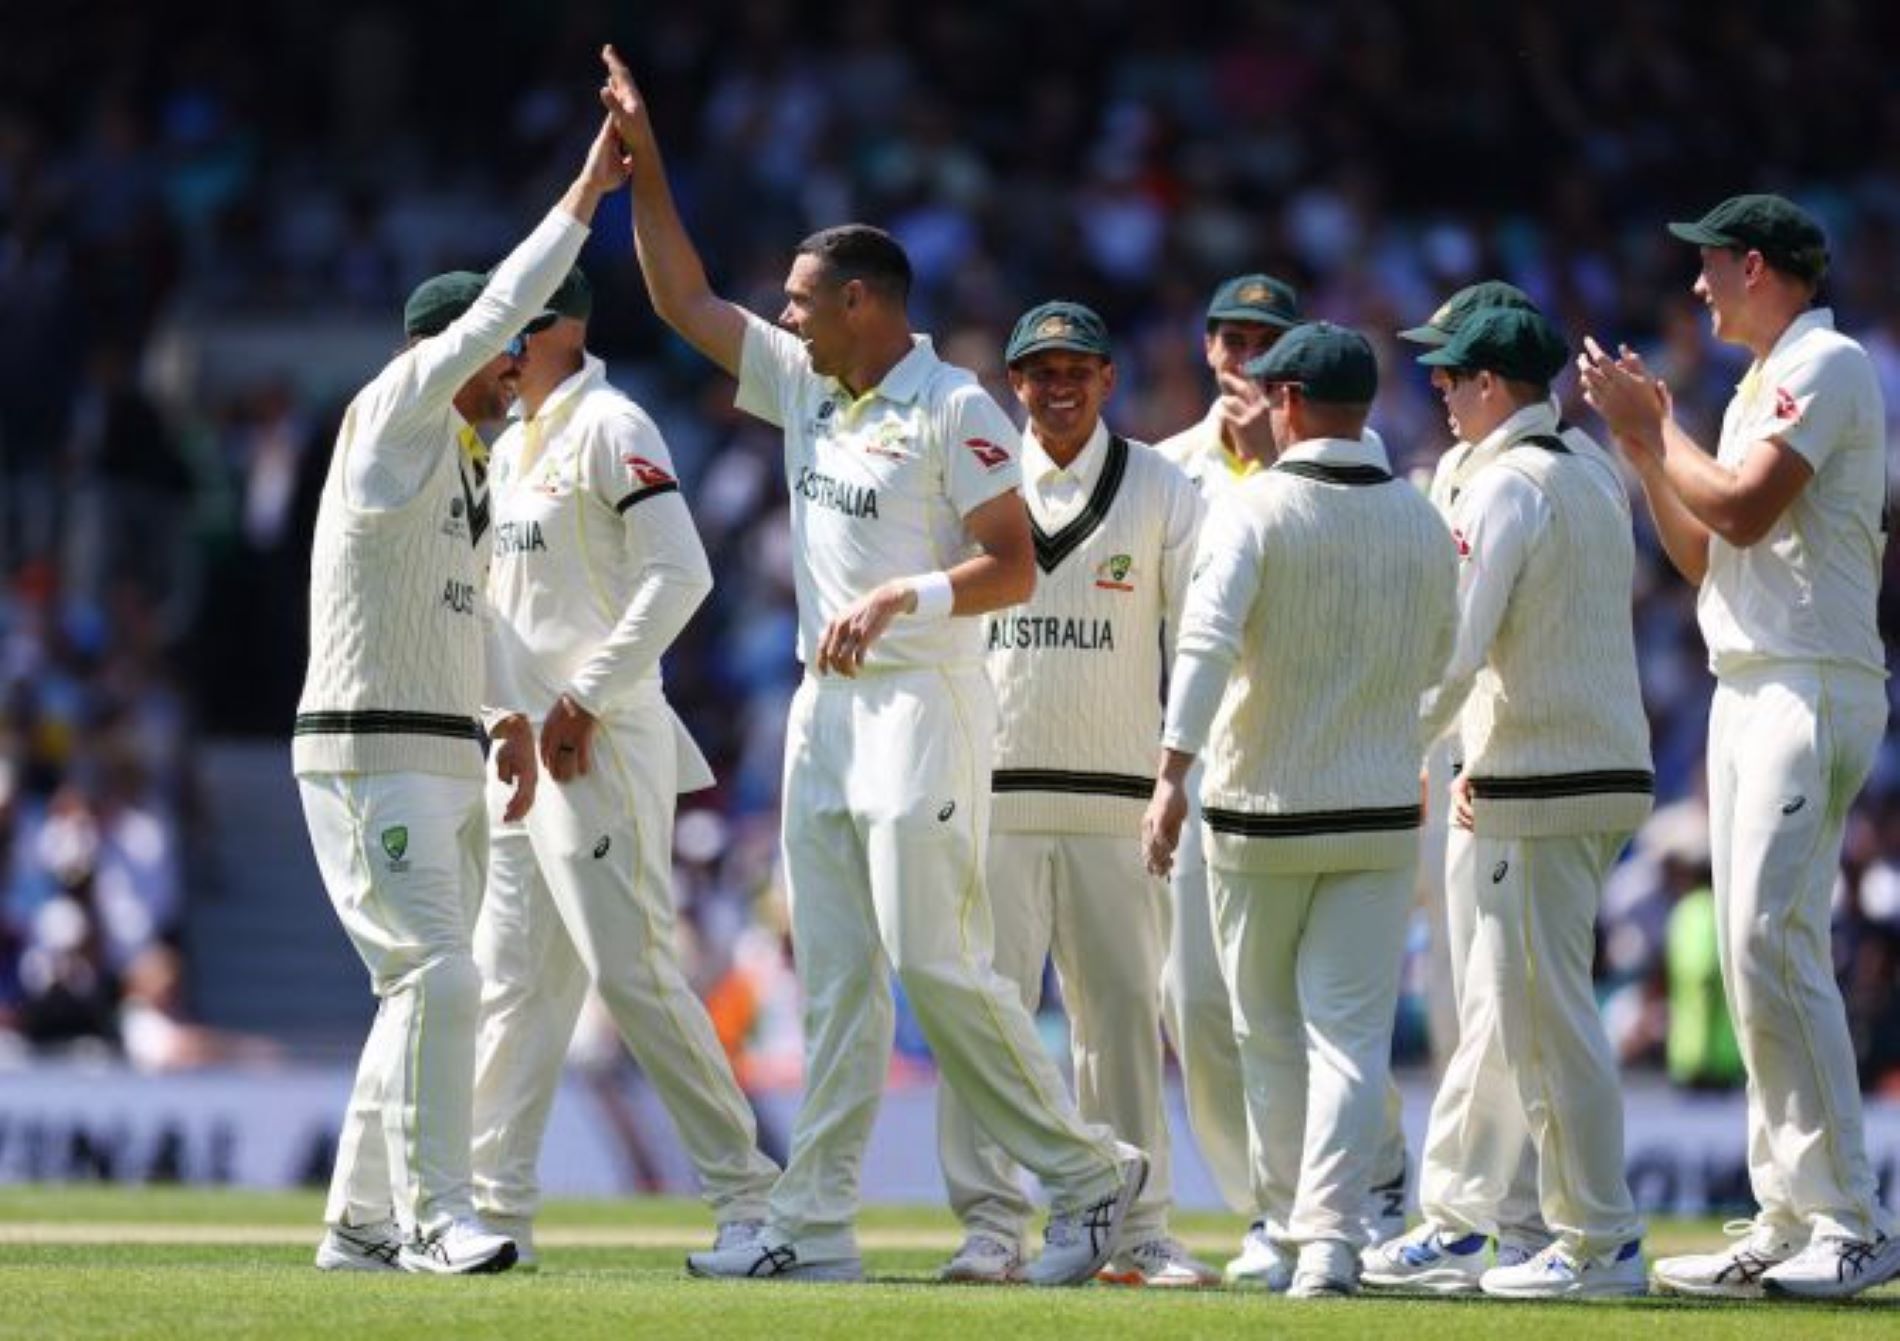 Australian bowlers were incisive on day 2 of the WTC final